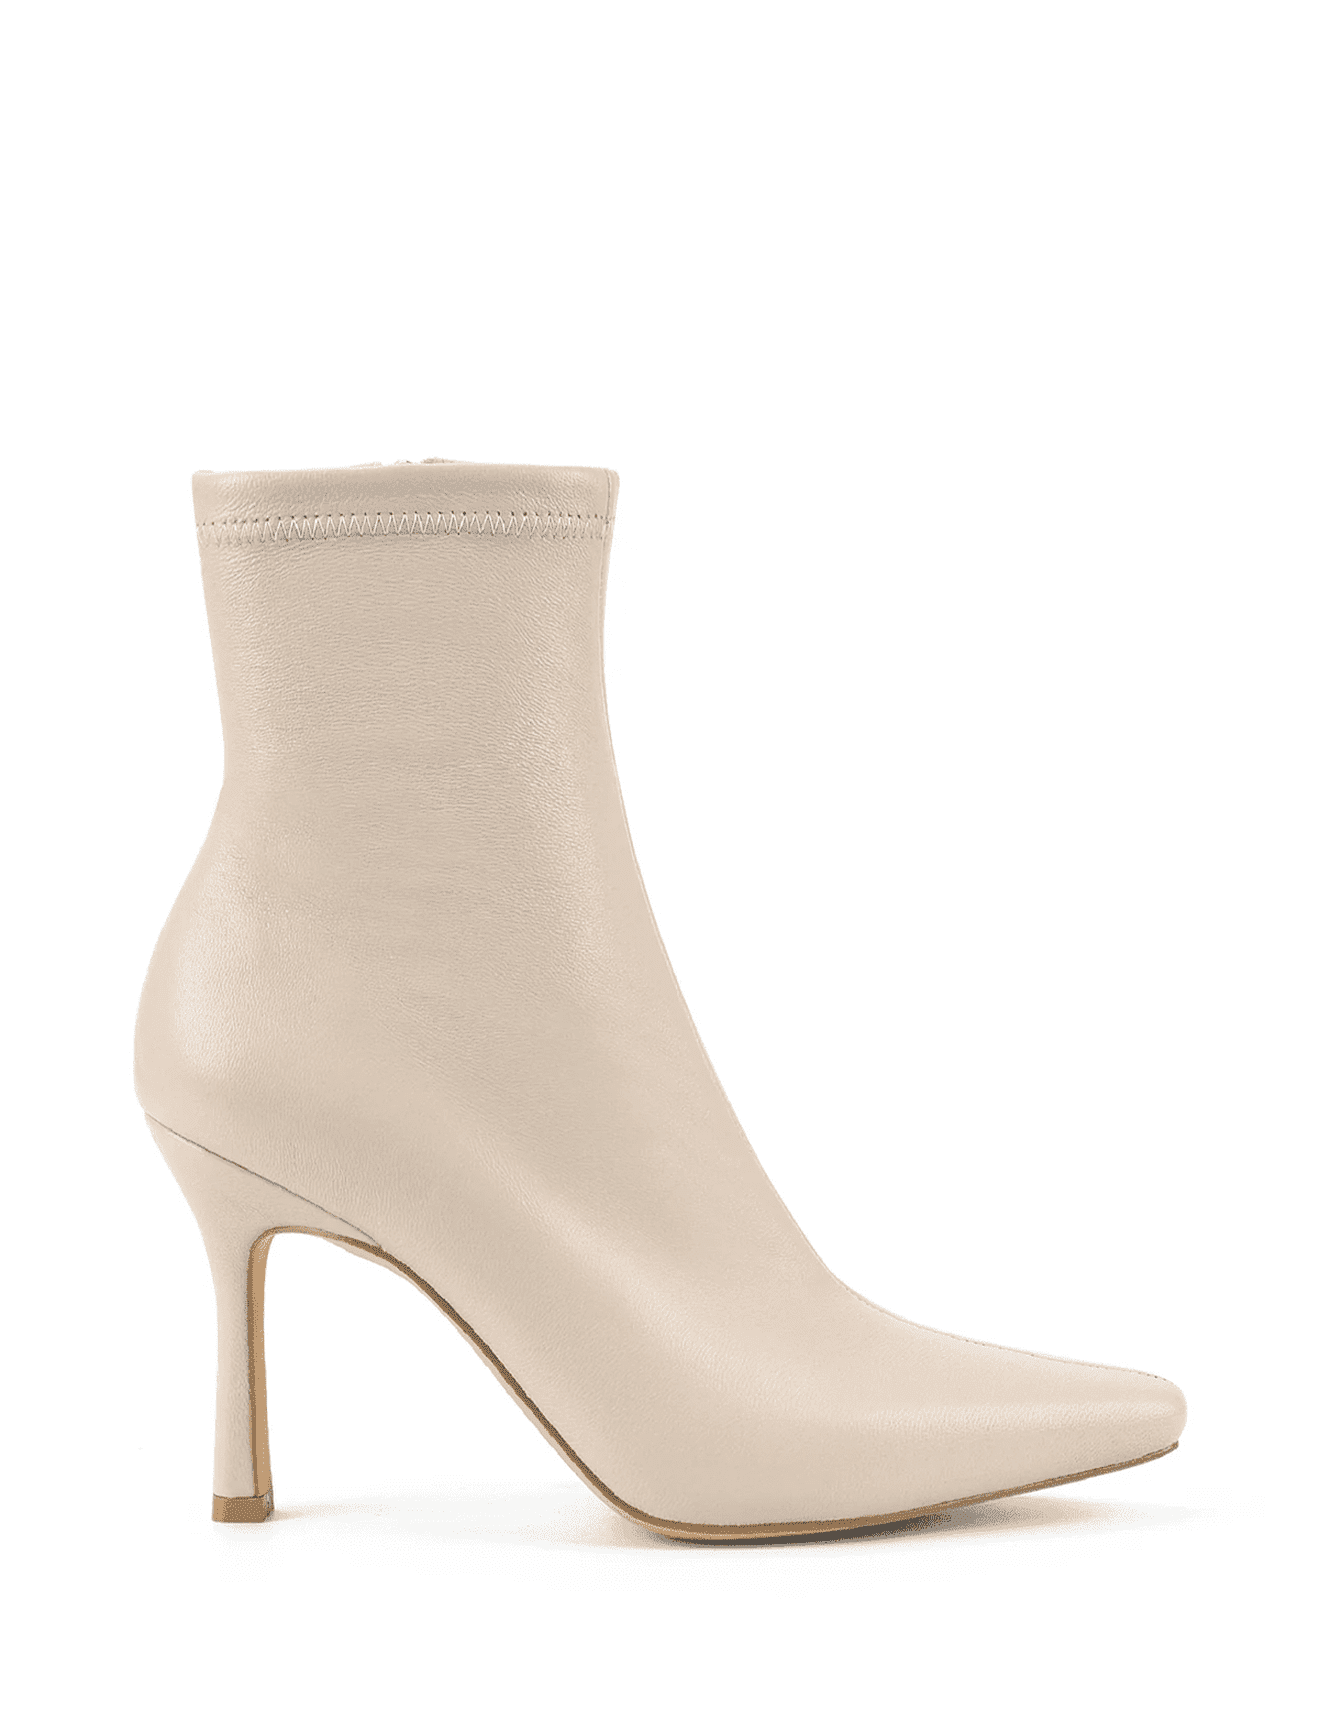 Dillon Stretch Ankle Boots - Bone Stretch Leather